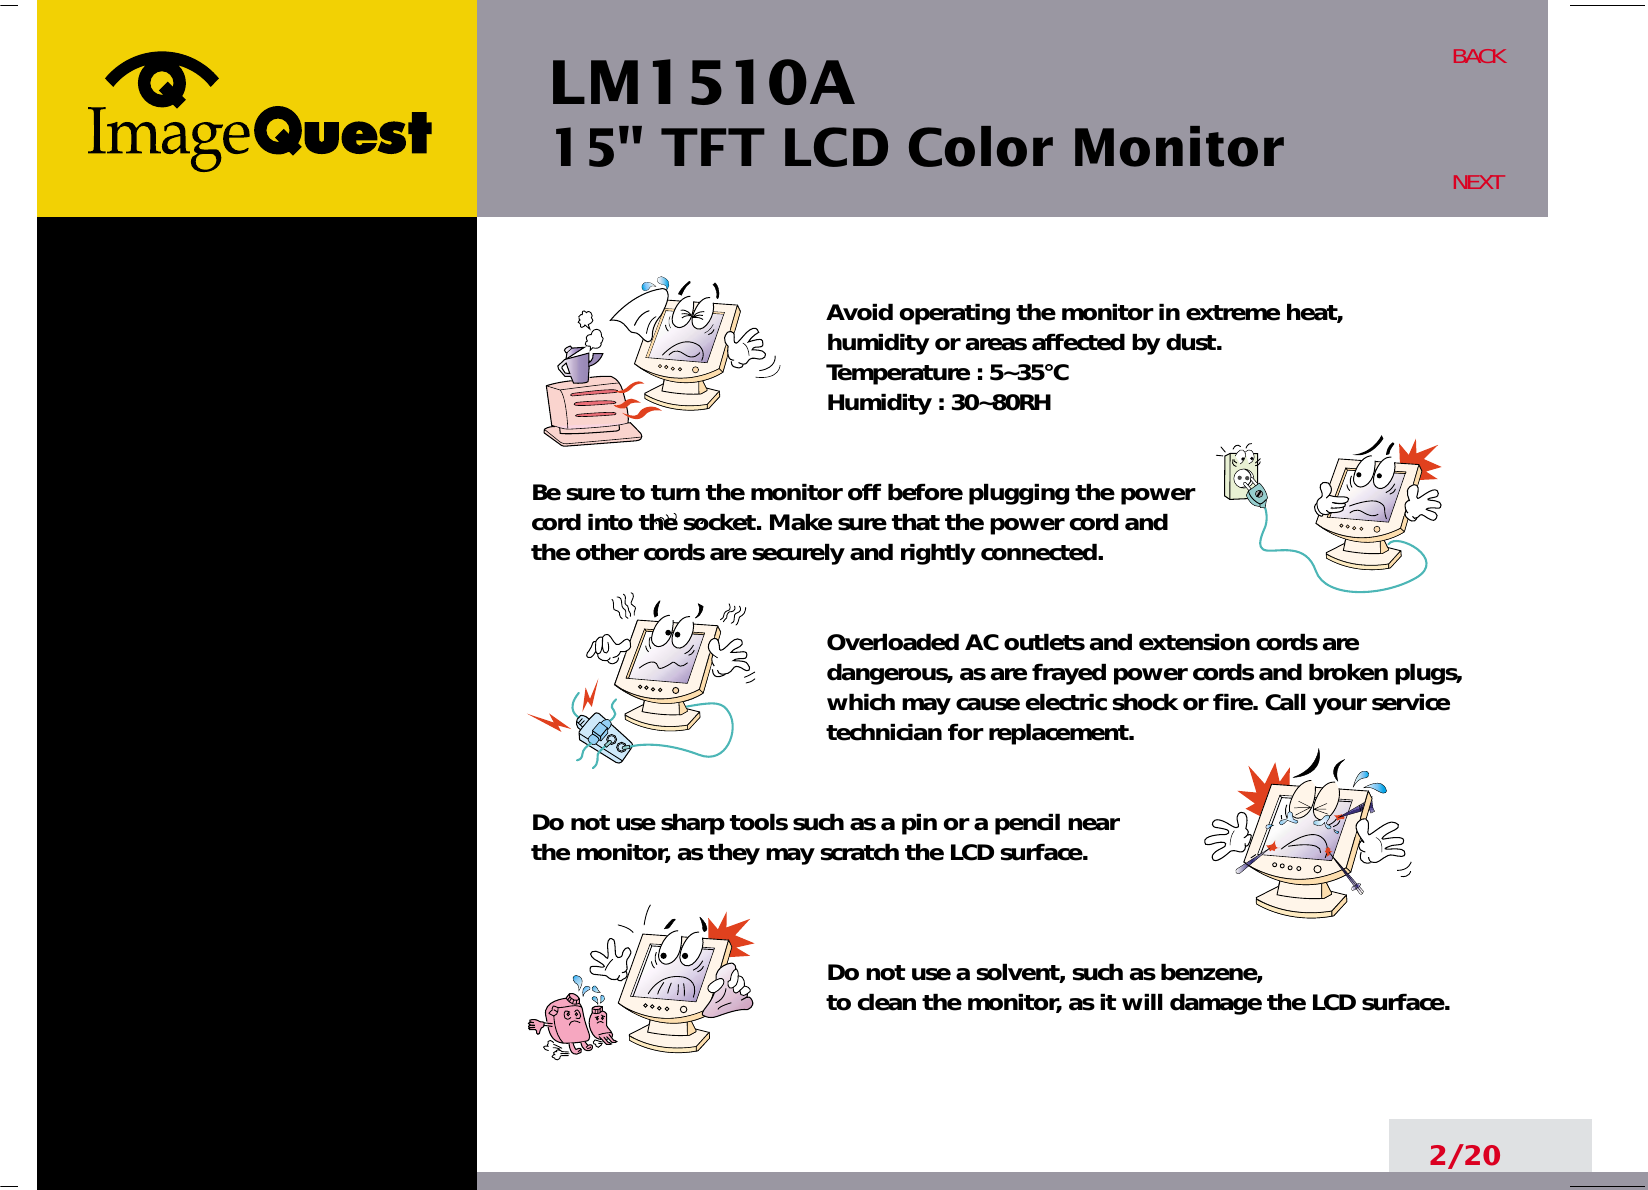 LM1510A15&quot; TFT LCD Color Monitor2/20BACKNEXTAvoid operating the monitor in extreme heat, humidity or areas affected by dust. Temperature : 5~35°CHumidity : 30~80RH Be sure to turn the monitor off before plugging the power  cord into the socket. Make sure that the power cord and the other cords are securely and rightly connected.Overloaded AC outlets and extension cords aredangerous, as are frayed power cords and broken plugs,which may cause electric shock or fire. Call your servicetechnician for replacement.Do not use sharp tools such as a pin or a pencil near the monitor, as they may scratch the LCD surface.Do not use a solvent, such as benzene, to clean the monitor, as it will damage the LCD surface.